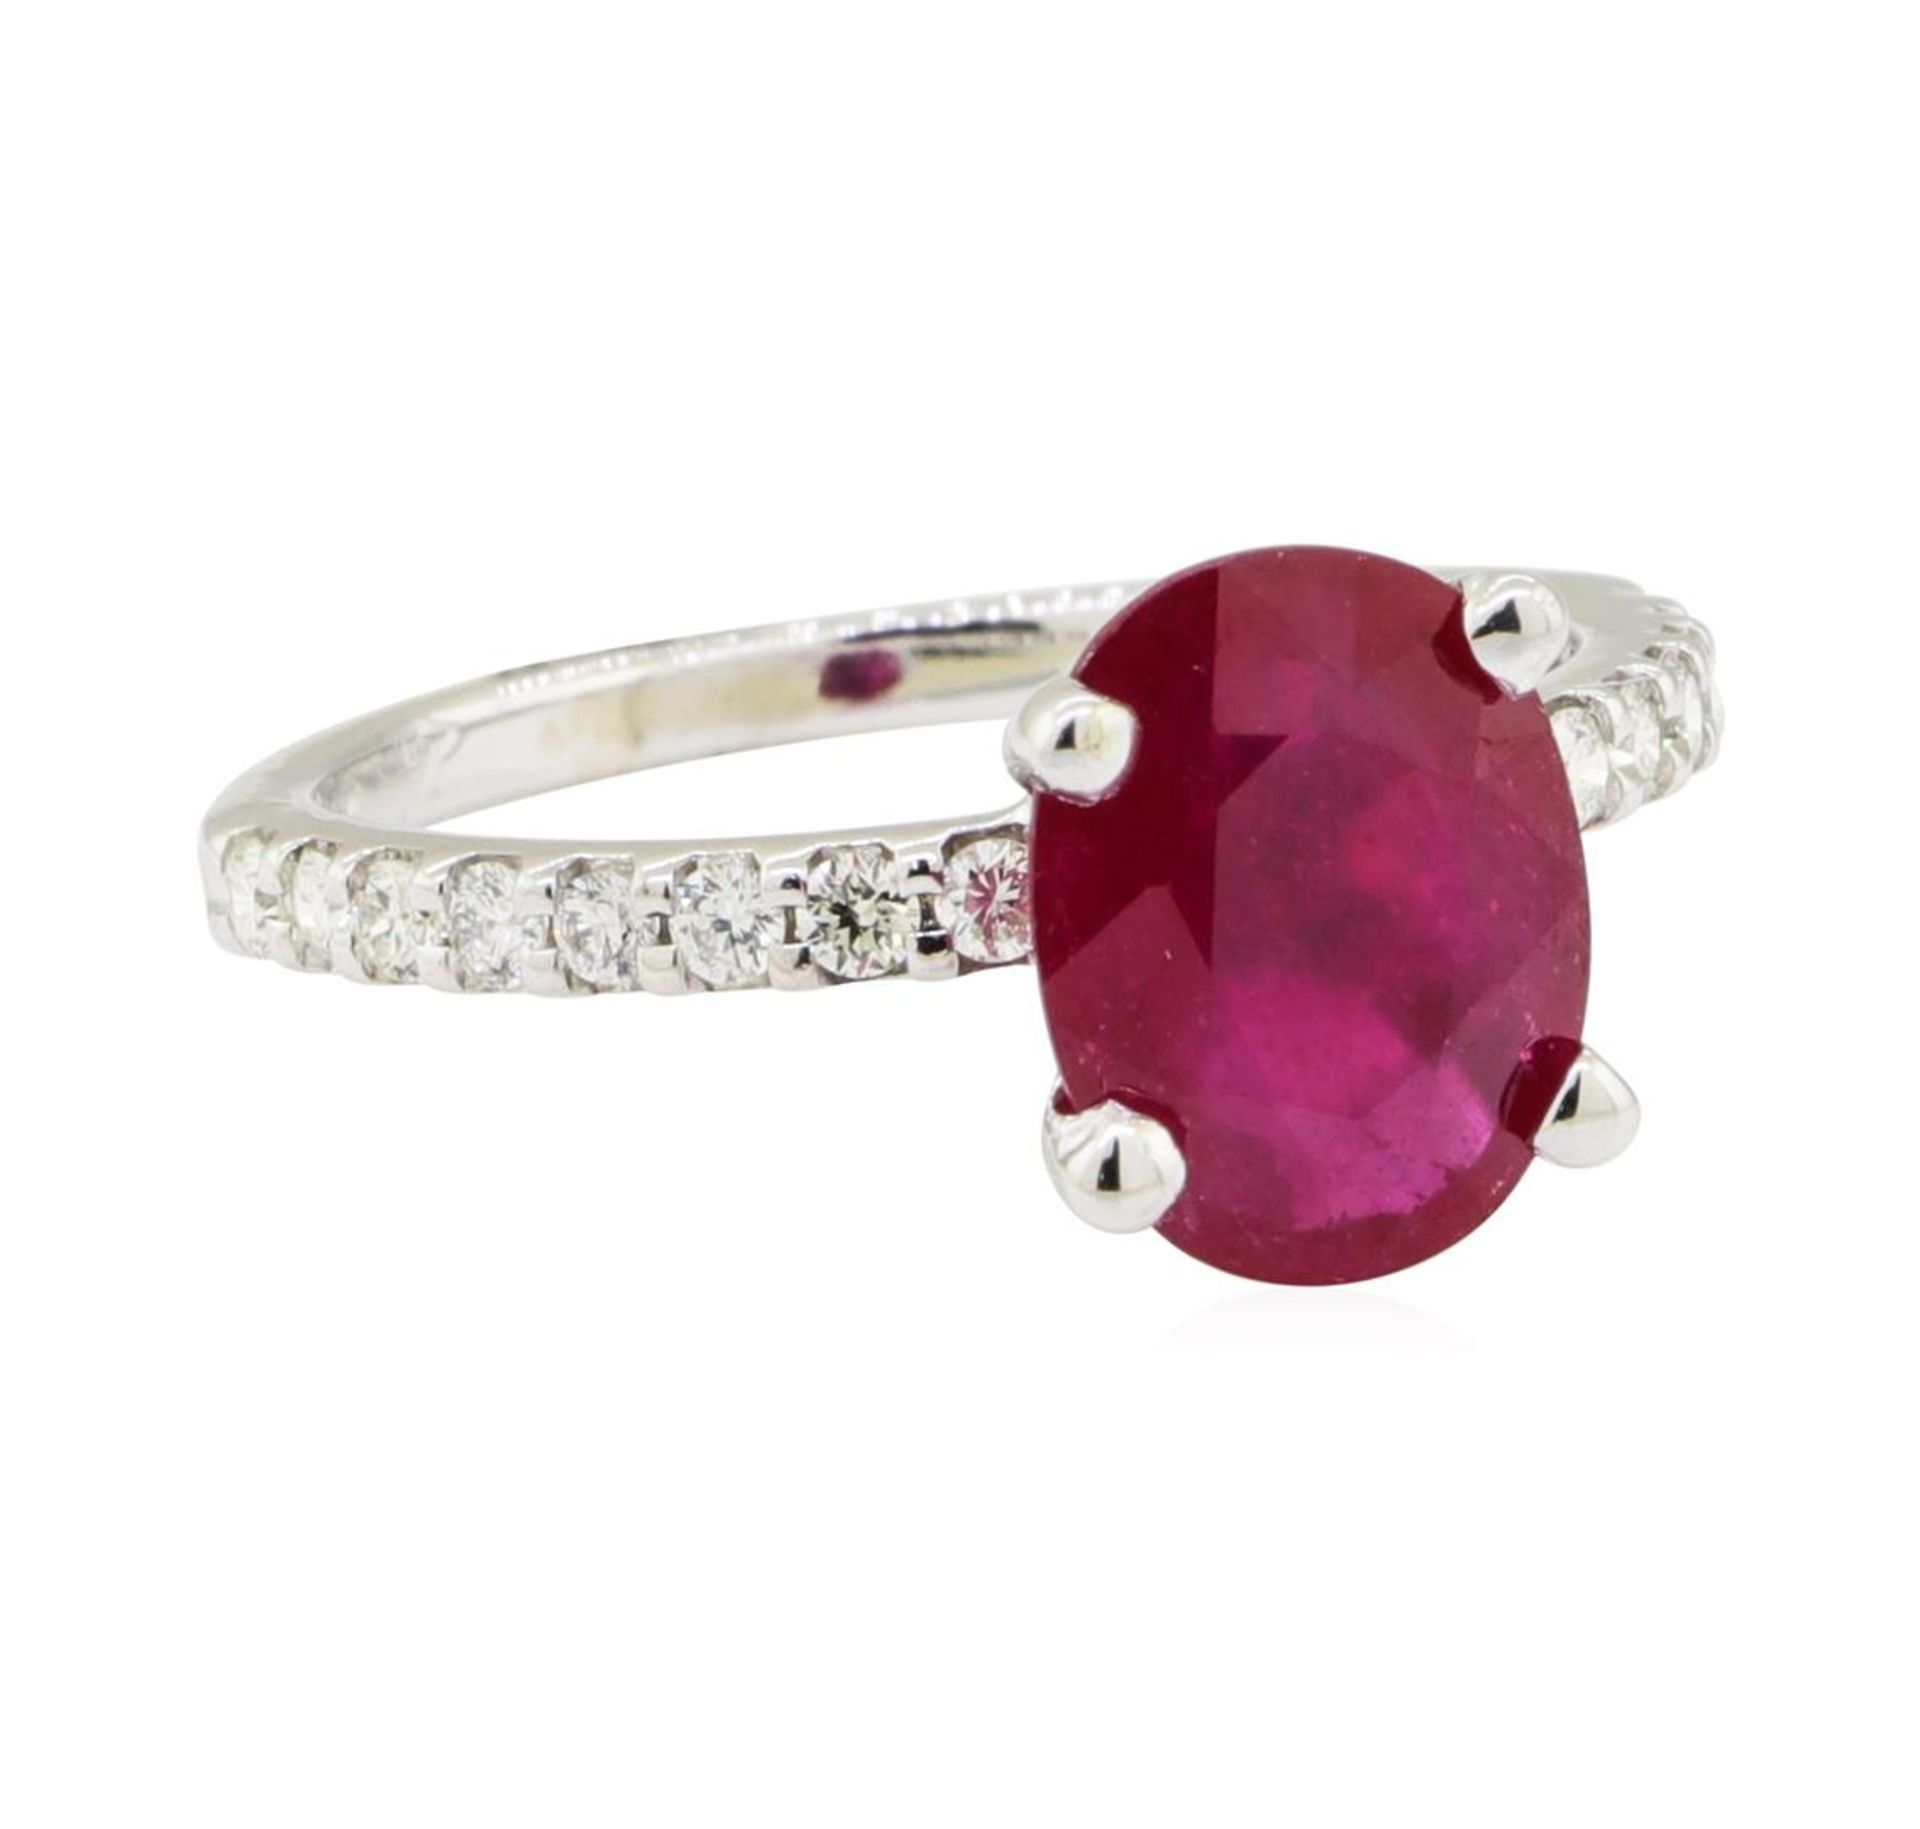 2.38ctw Glass Filled Natural Ruby and Diamond Ring - 14KT White Gold